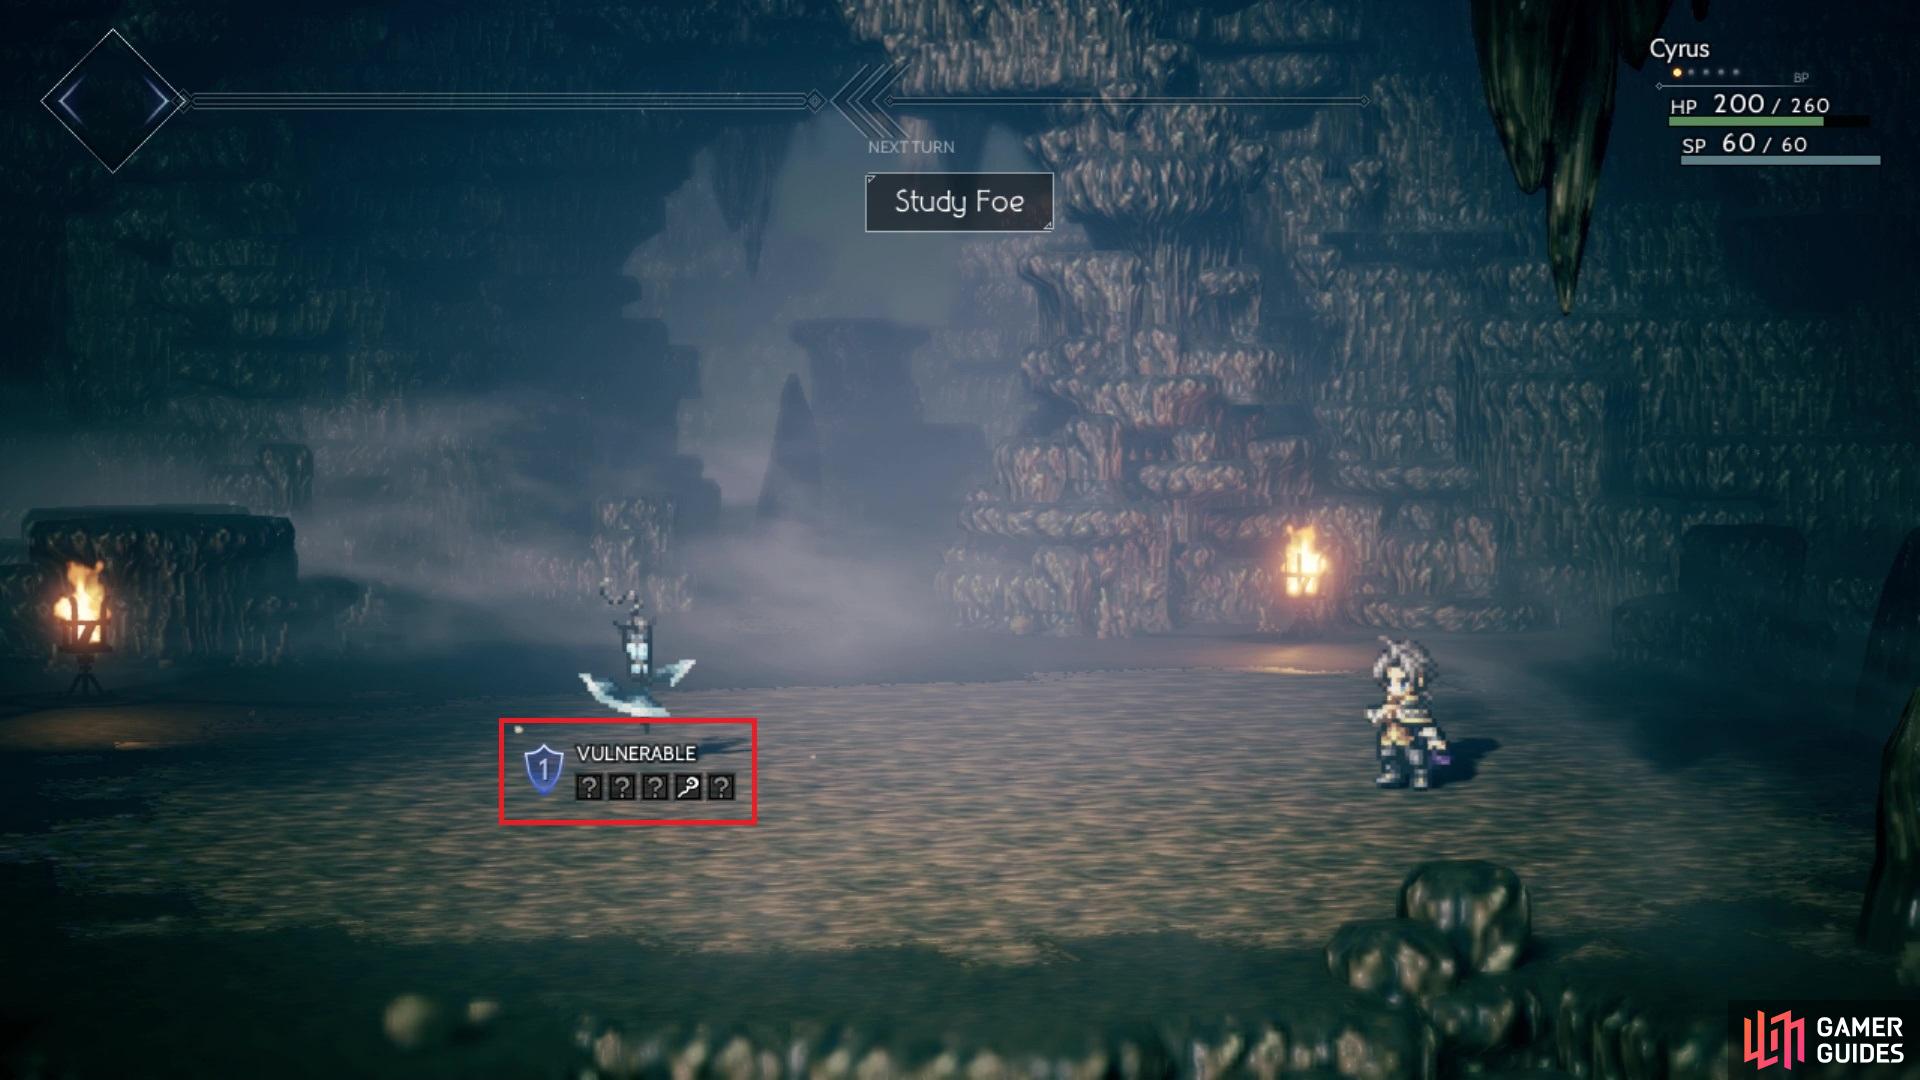 The Shield Points and weaknesses are shown under the enemy sprite